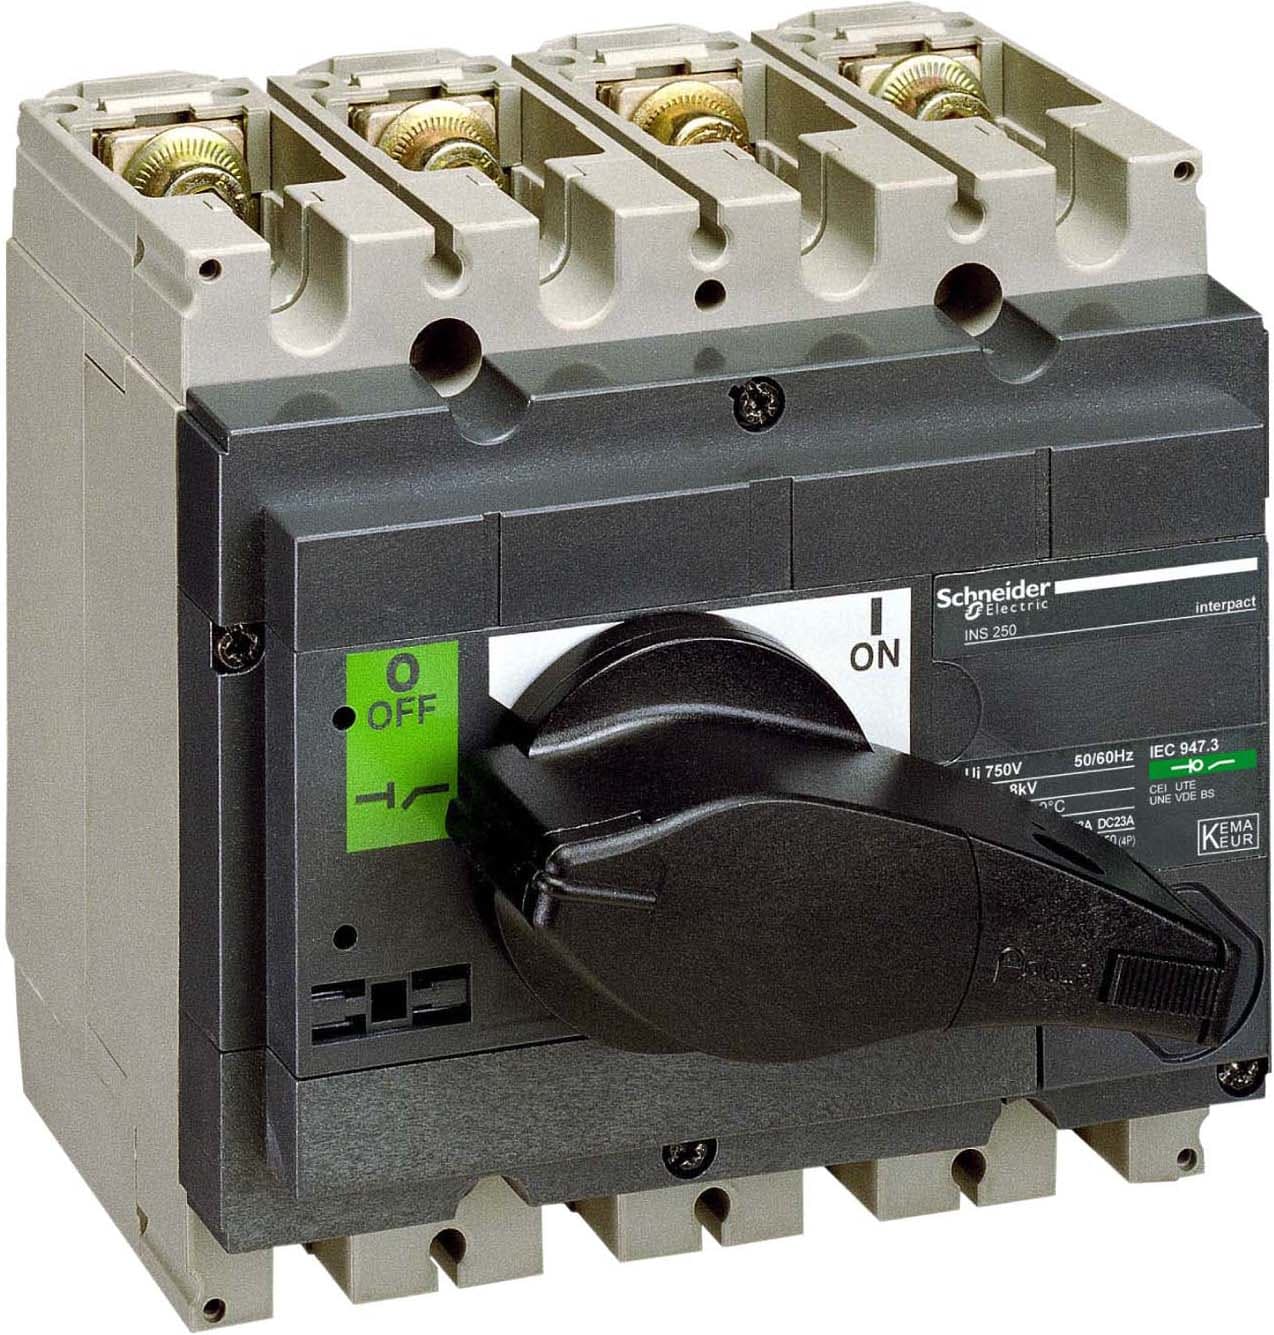 Schneider Electric - LASTBRYTER INS250 4P 31107  INTERPACT 250A